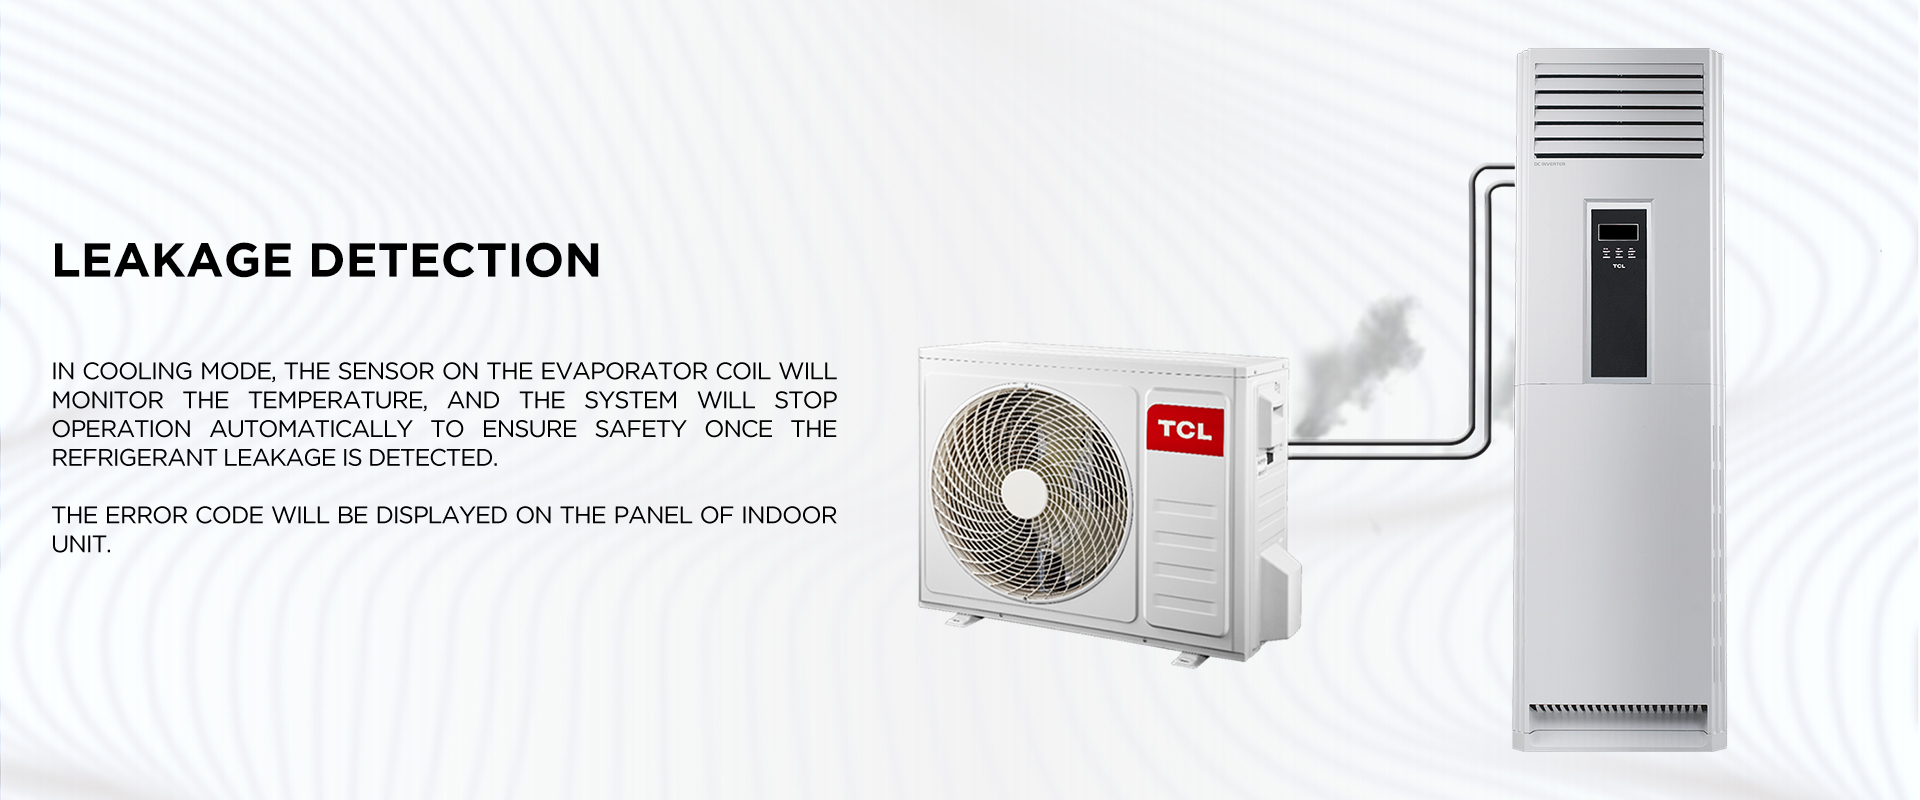 Leakage Detection - In cooling mode, the sensor on the evaporator coil will monitor the temperature, and the system will stop operation automatically to ensure safety once the refrigerant leakage is detected. The error code will be displayed on the panel of indoor unit. 
